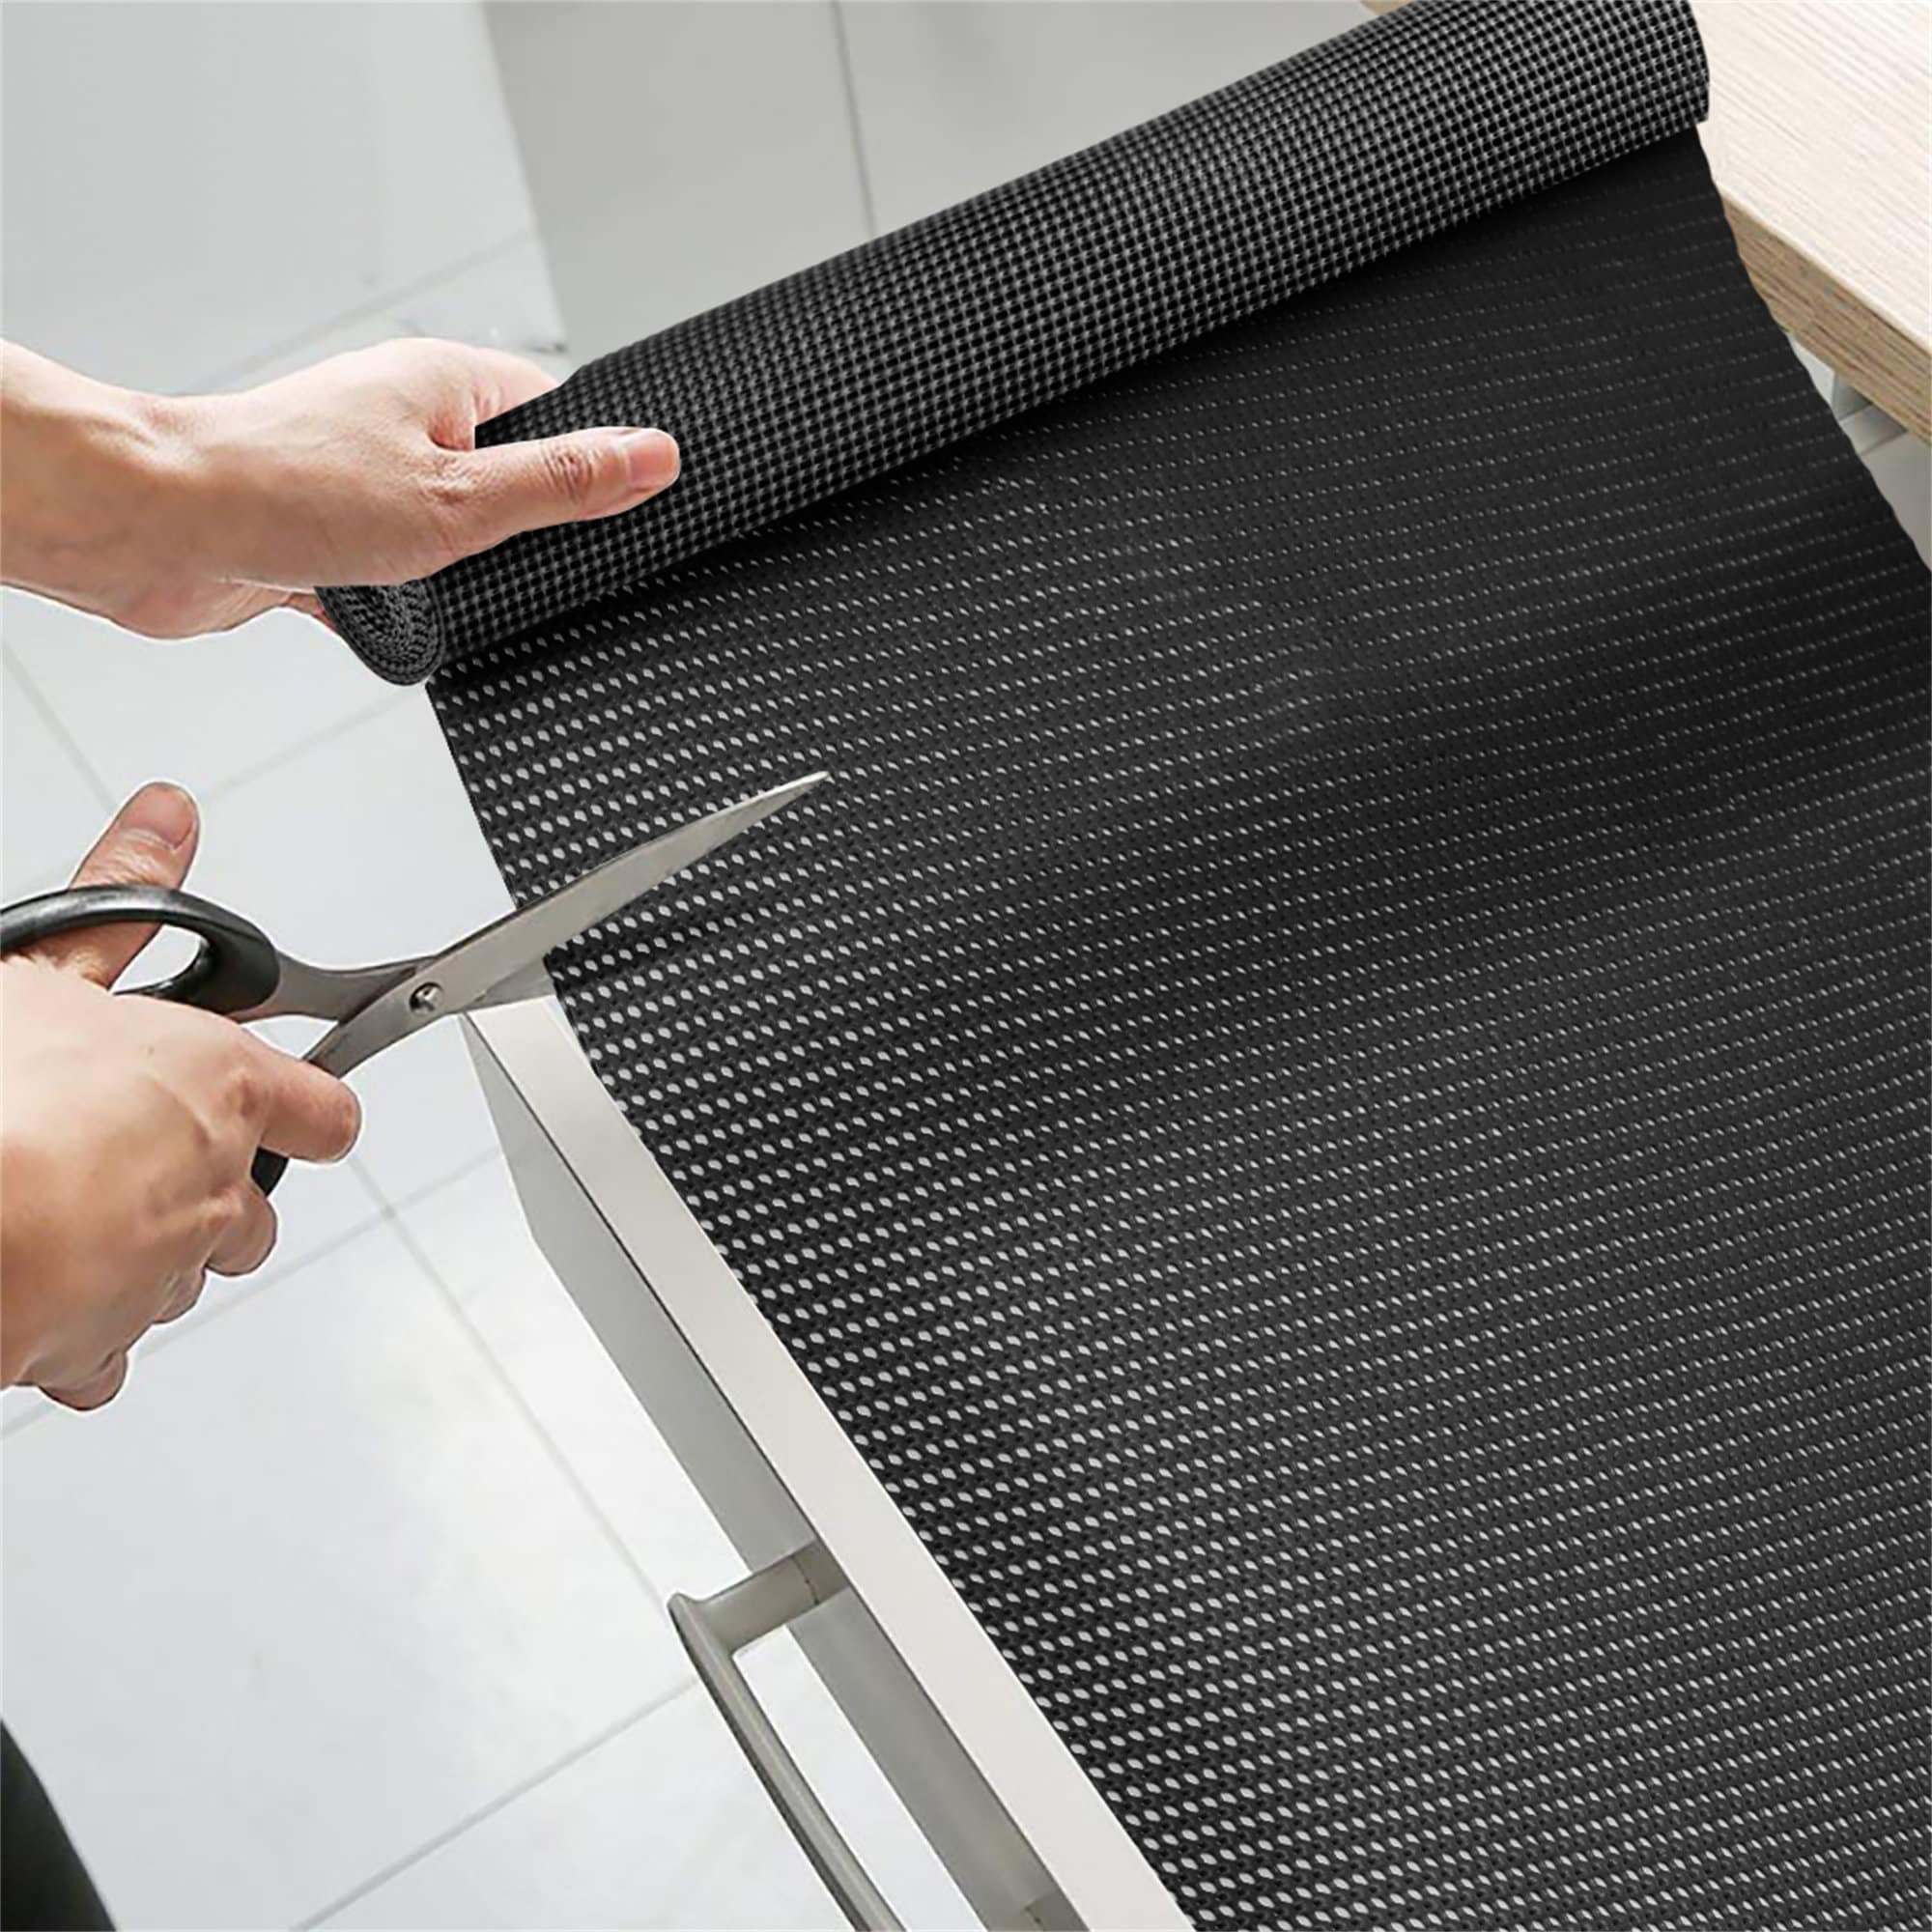 Hot Selling Non Adhesive Non Slip Mat Drawer Liners for Kitchen